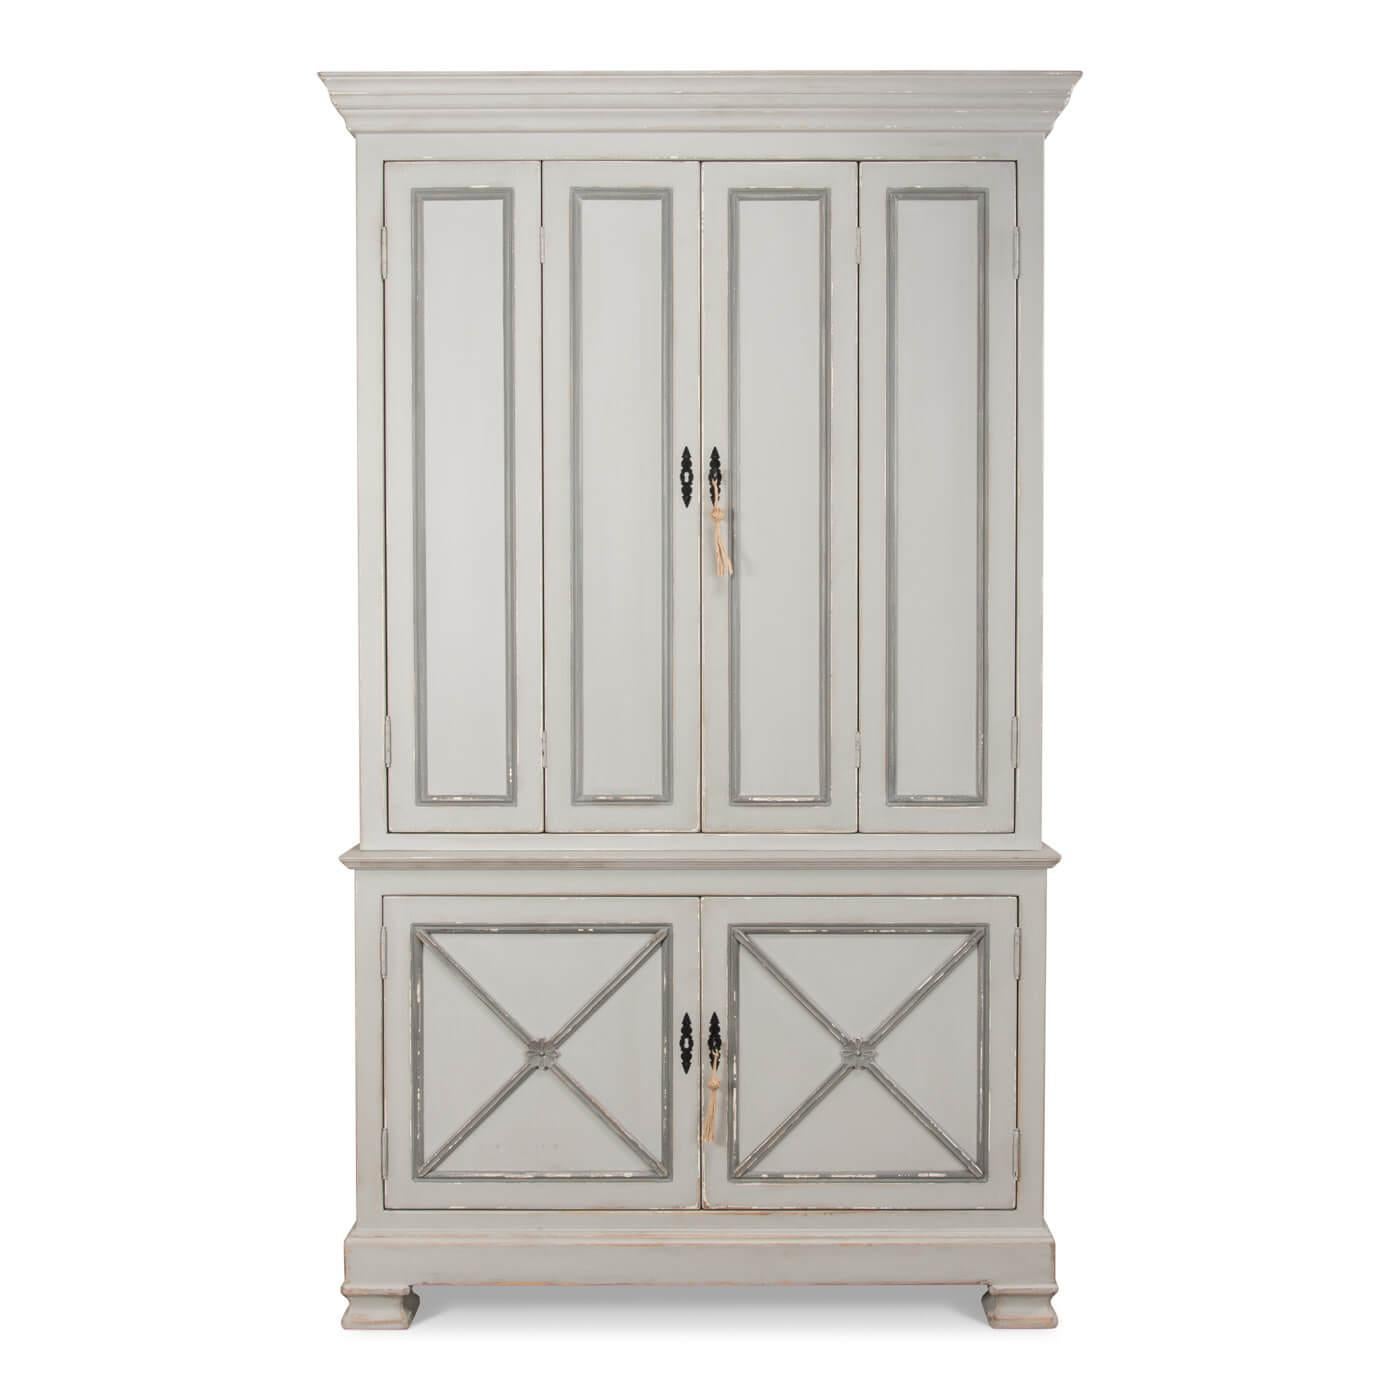 French-inspired tall provincial painted cabinet with a lightly distressed finish. This beautiful cabinet is inspired by an 18th-century French antique. 

The upper cabinet has bi-fold doors and when open reveals two shelves. The lower cabinet has